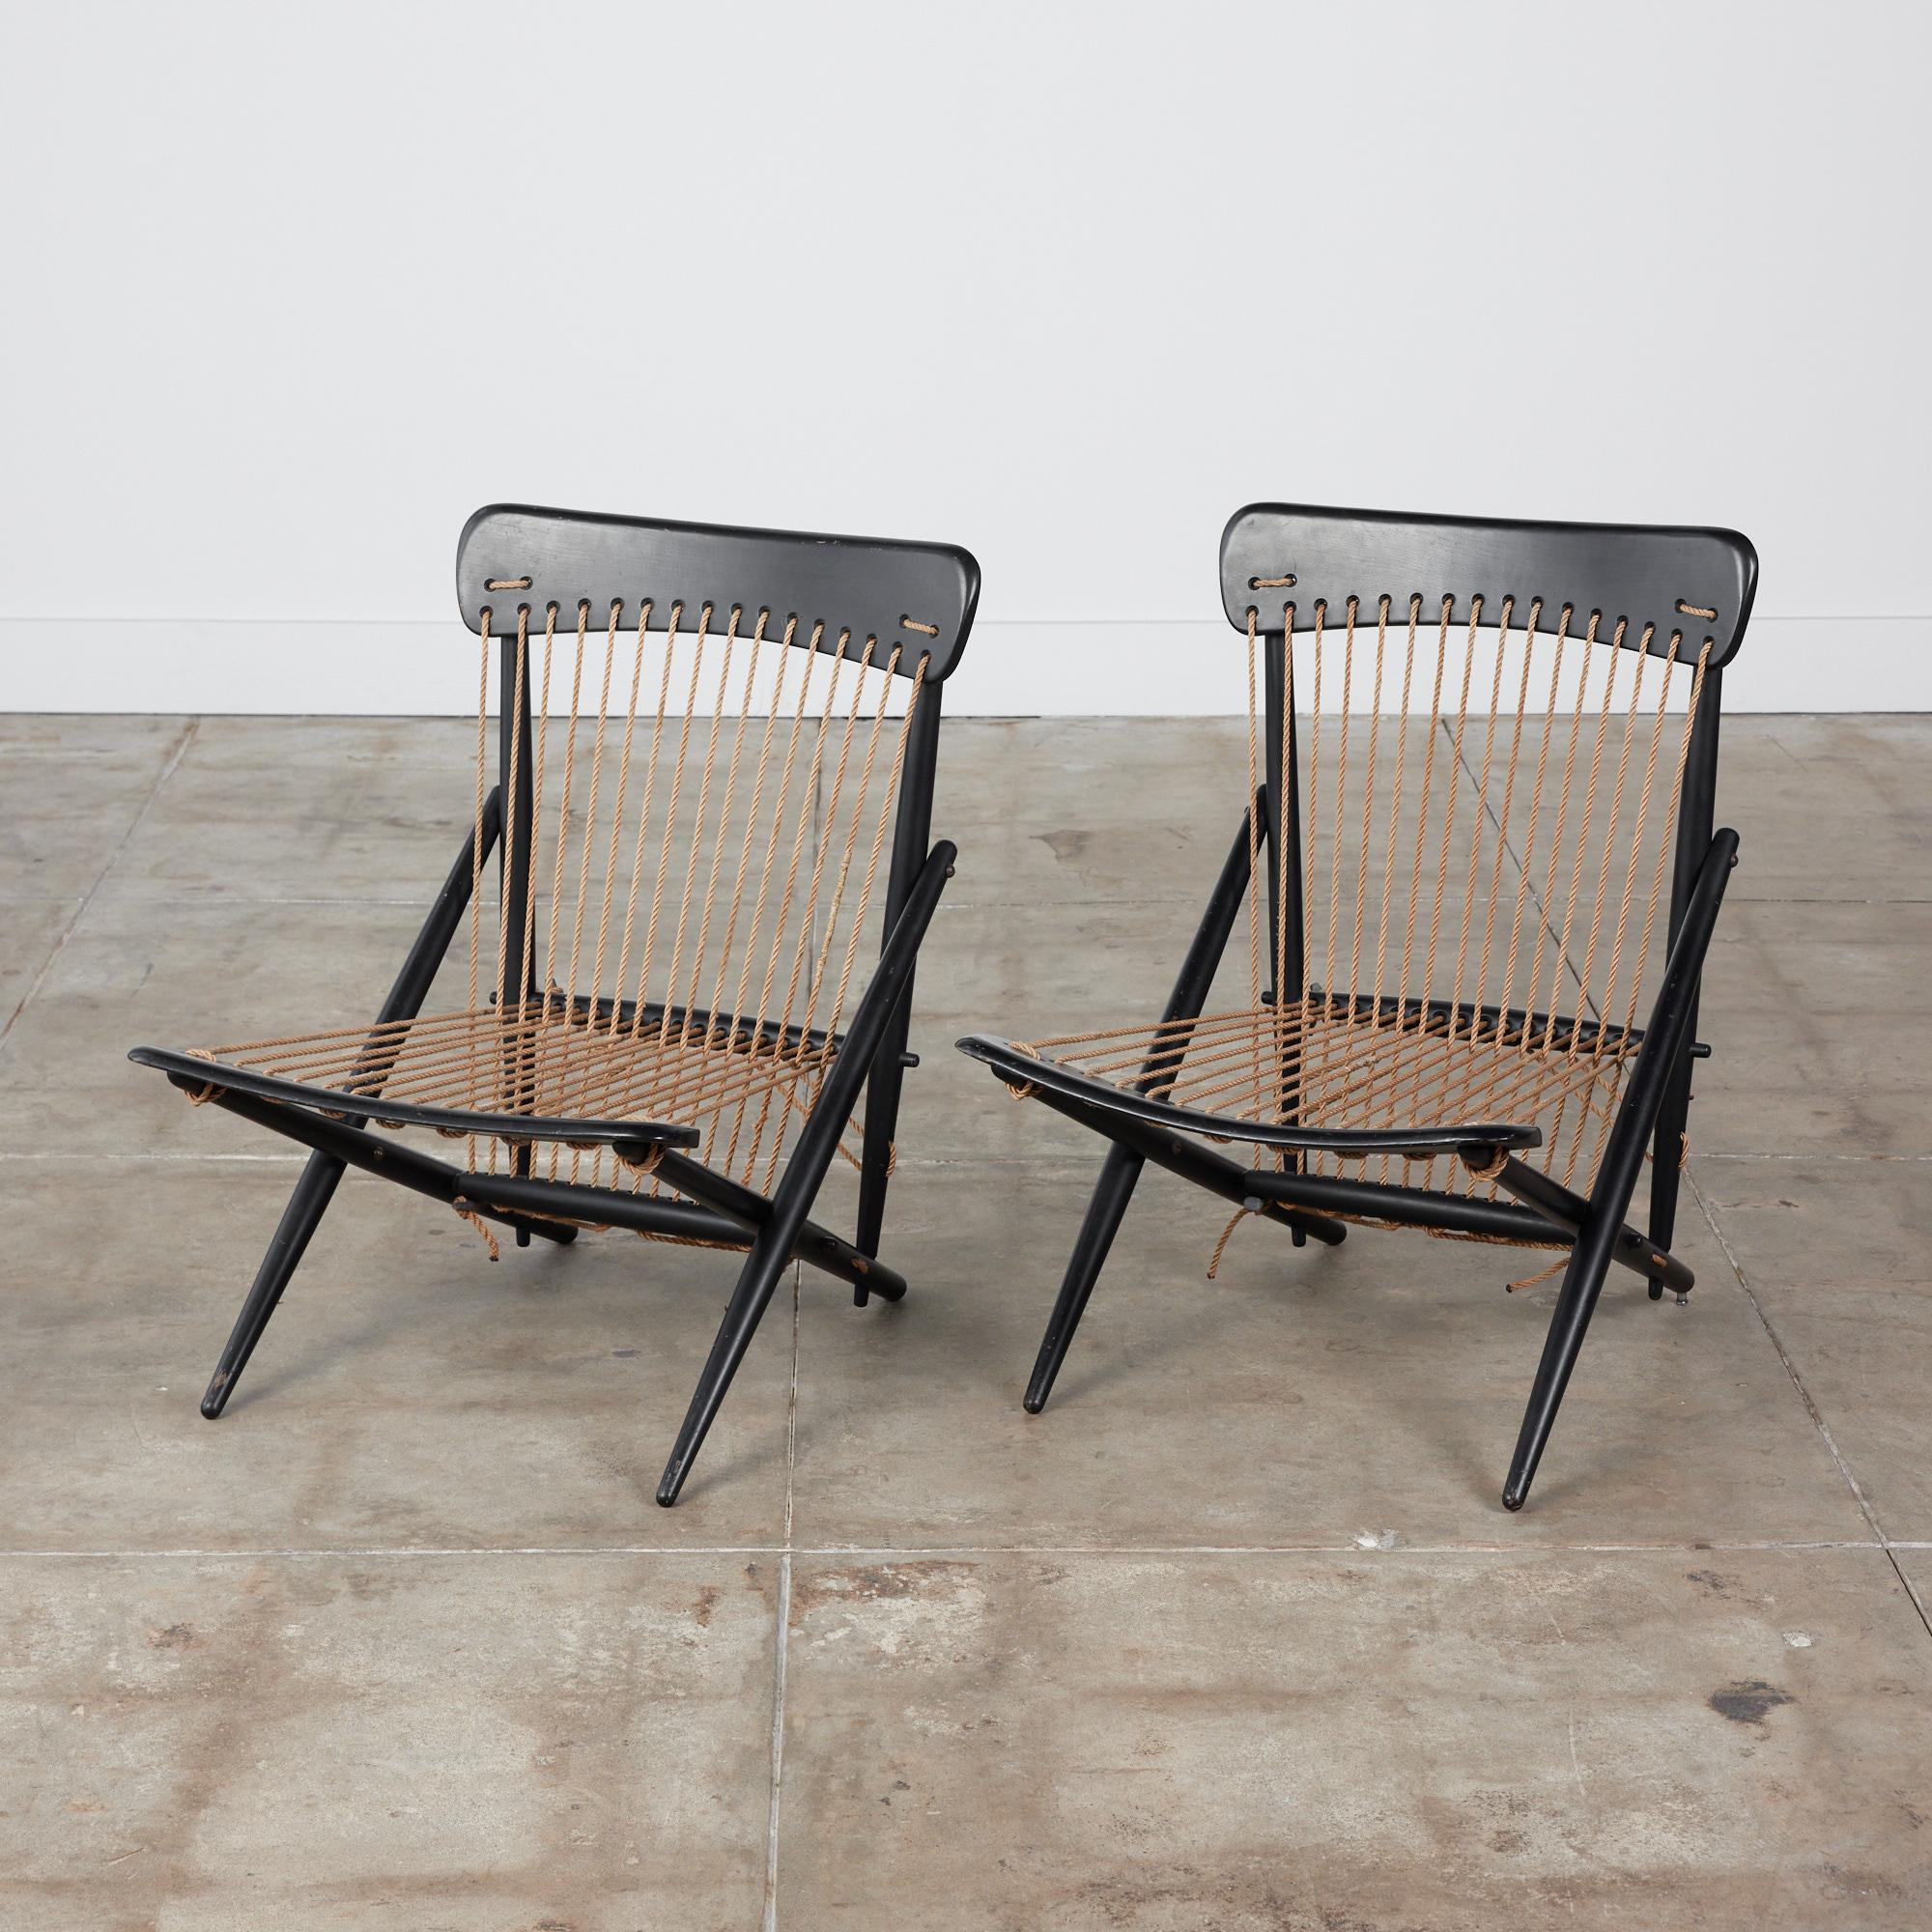 Pair of Maruni rope lounge chairs, circa 1950s, Japan. The chairs feature an ebonized beech wood frame and are contrasted by their camel tension roped seat and seat back. These minimalist chairs have to look of a folding seat but are in a set